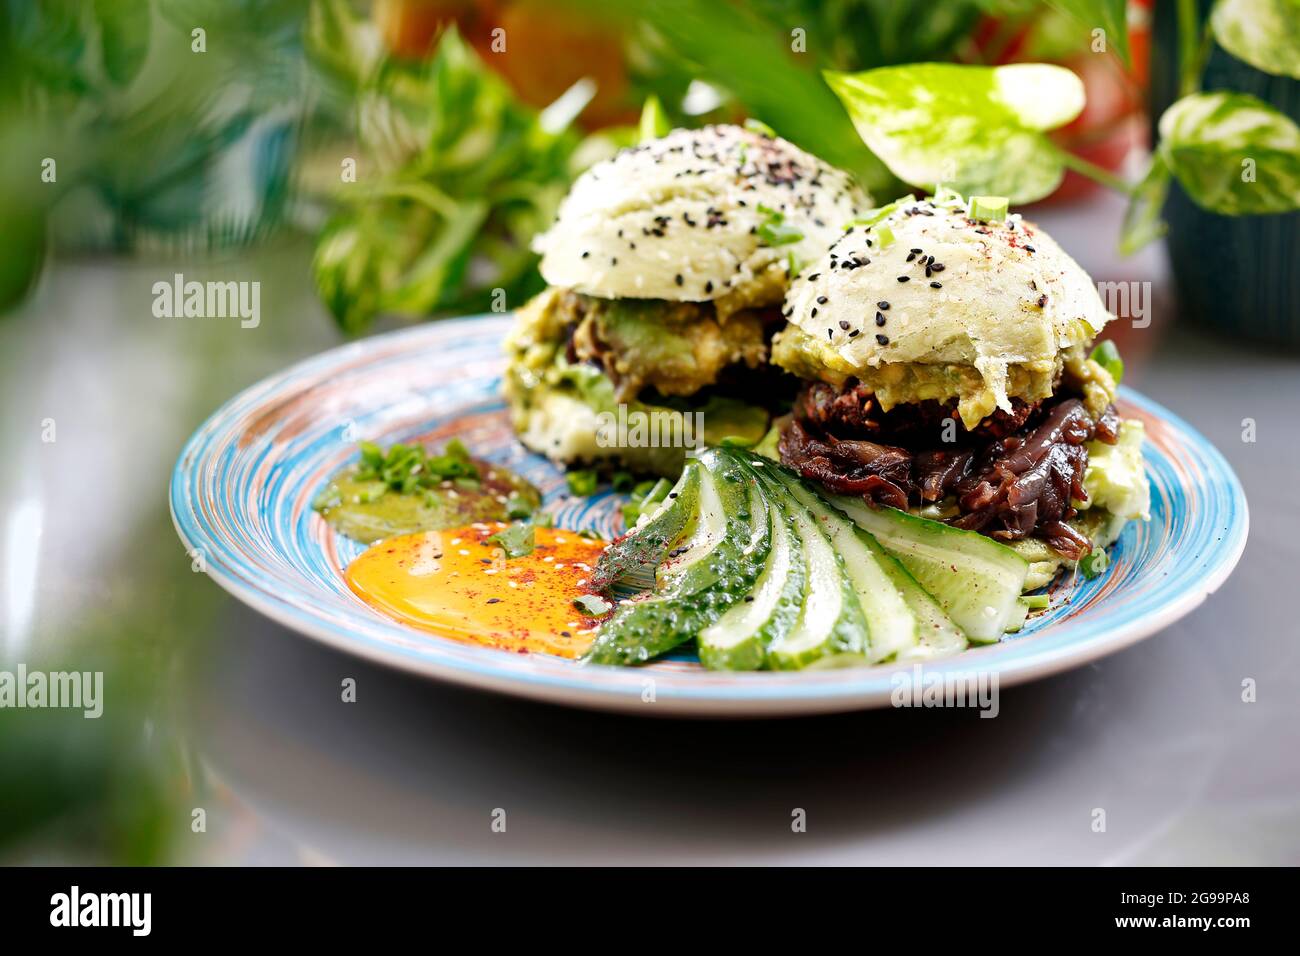 Sandwich with vegetables, fried red onion and avocado salad served with fresh cucumber and humus. Dish on a plate, food photography, serving proposal. Stock Photo